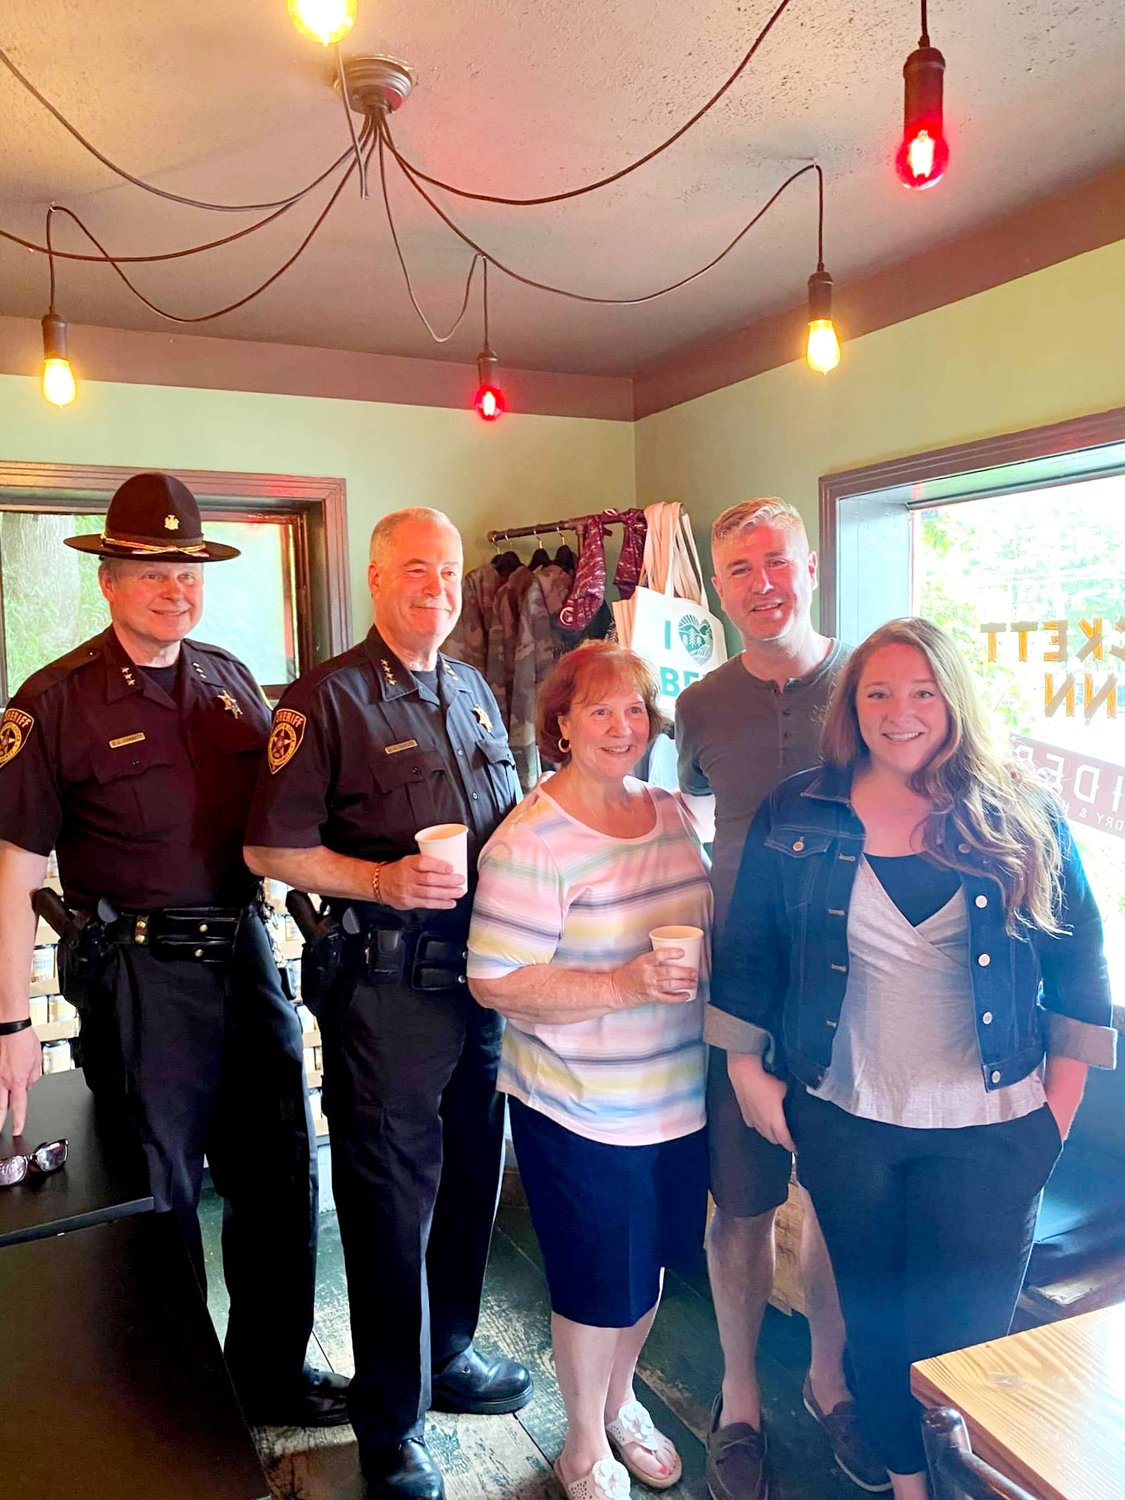 UnderSheriff Eric Chaboty and Sheriff Mike Schiff met with Margie Granese, John Pizzolato and Laura Burrell at the “Coffee With the Sheriff” event at the Stickett Inn in Barryville. Over forty residents of Highland stopped by to meet Sheriff Schiff and speak with him about their public safety concerns.